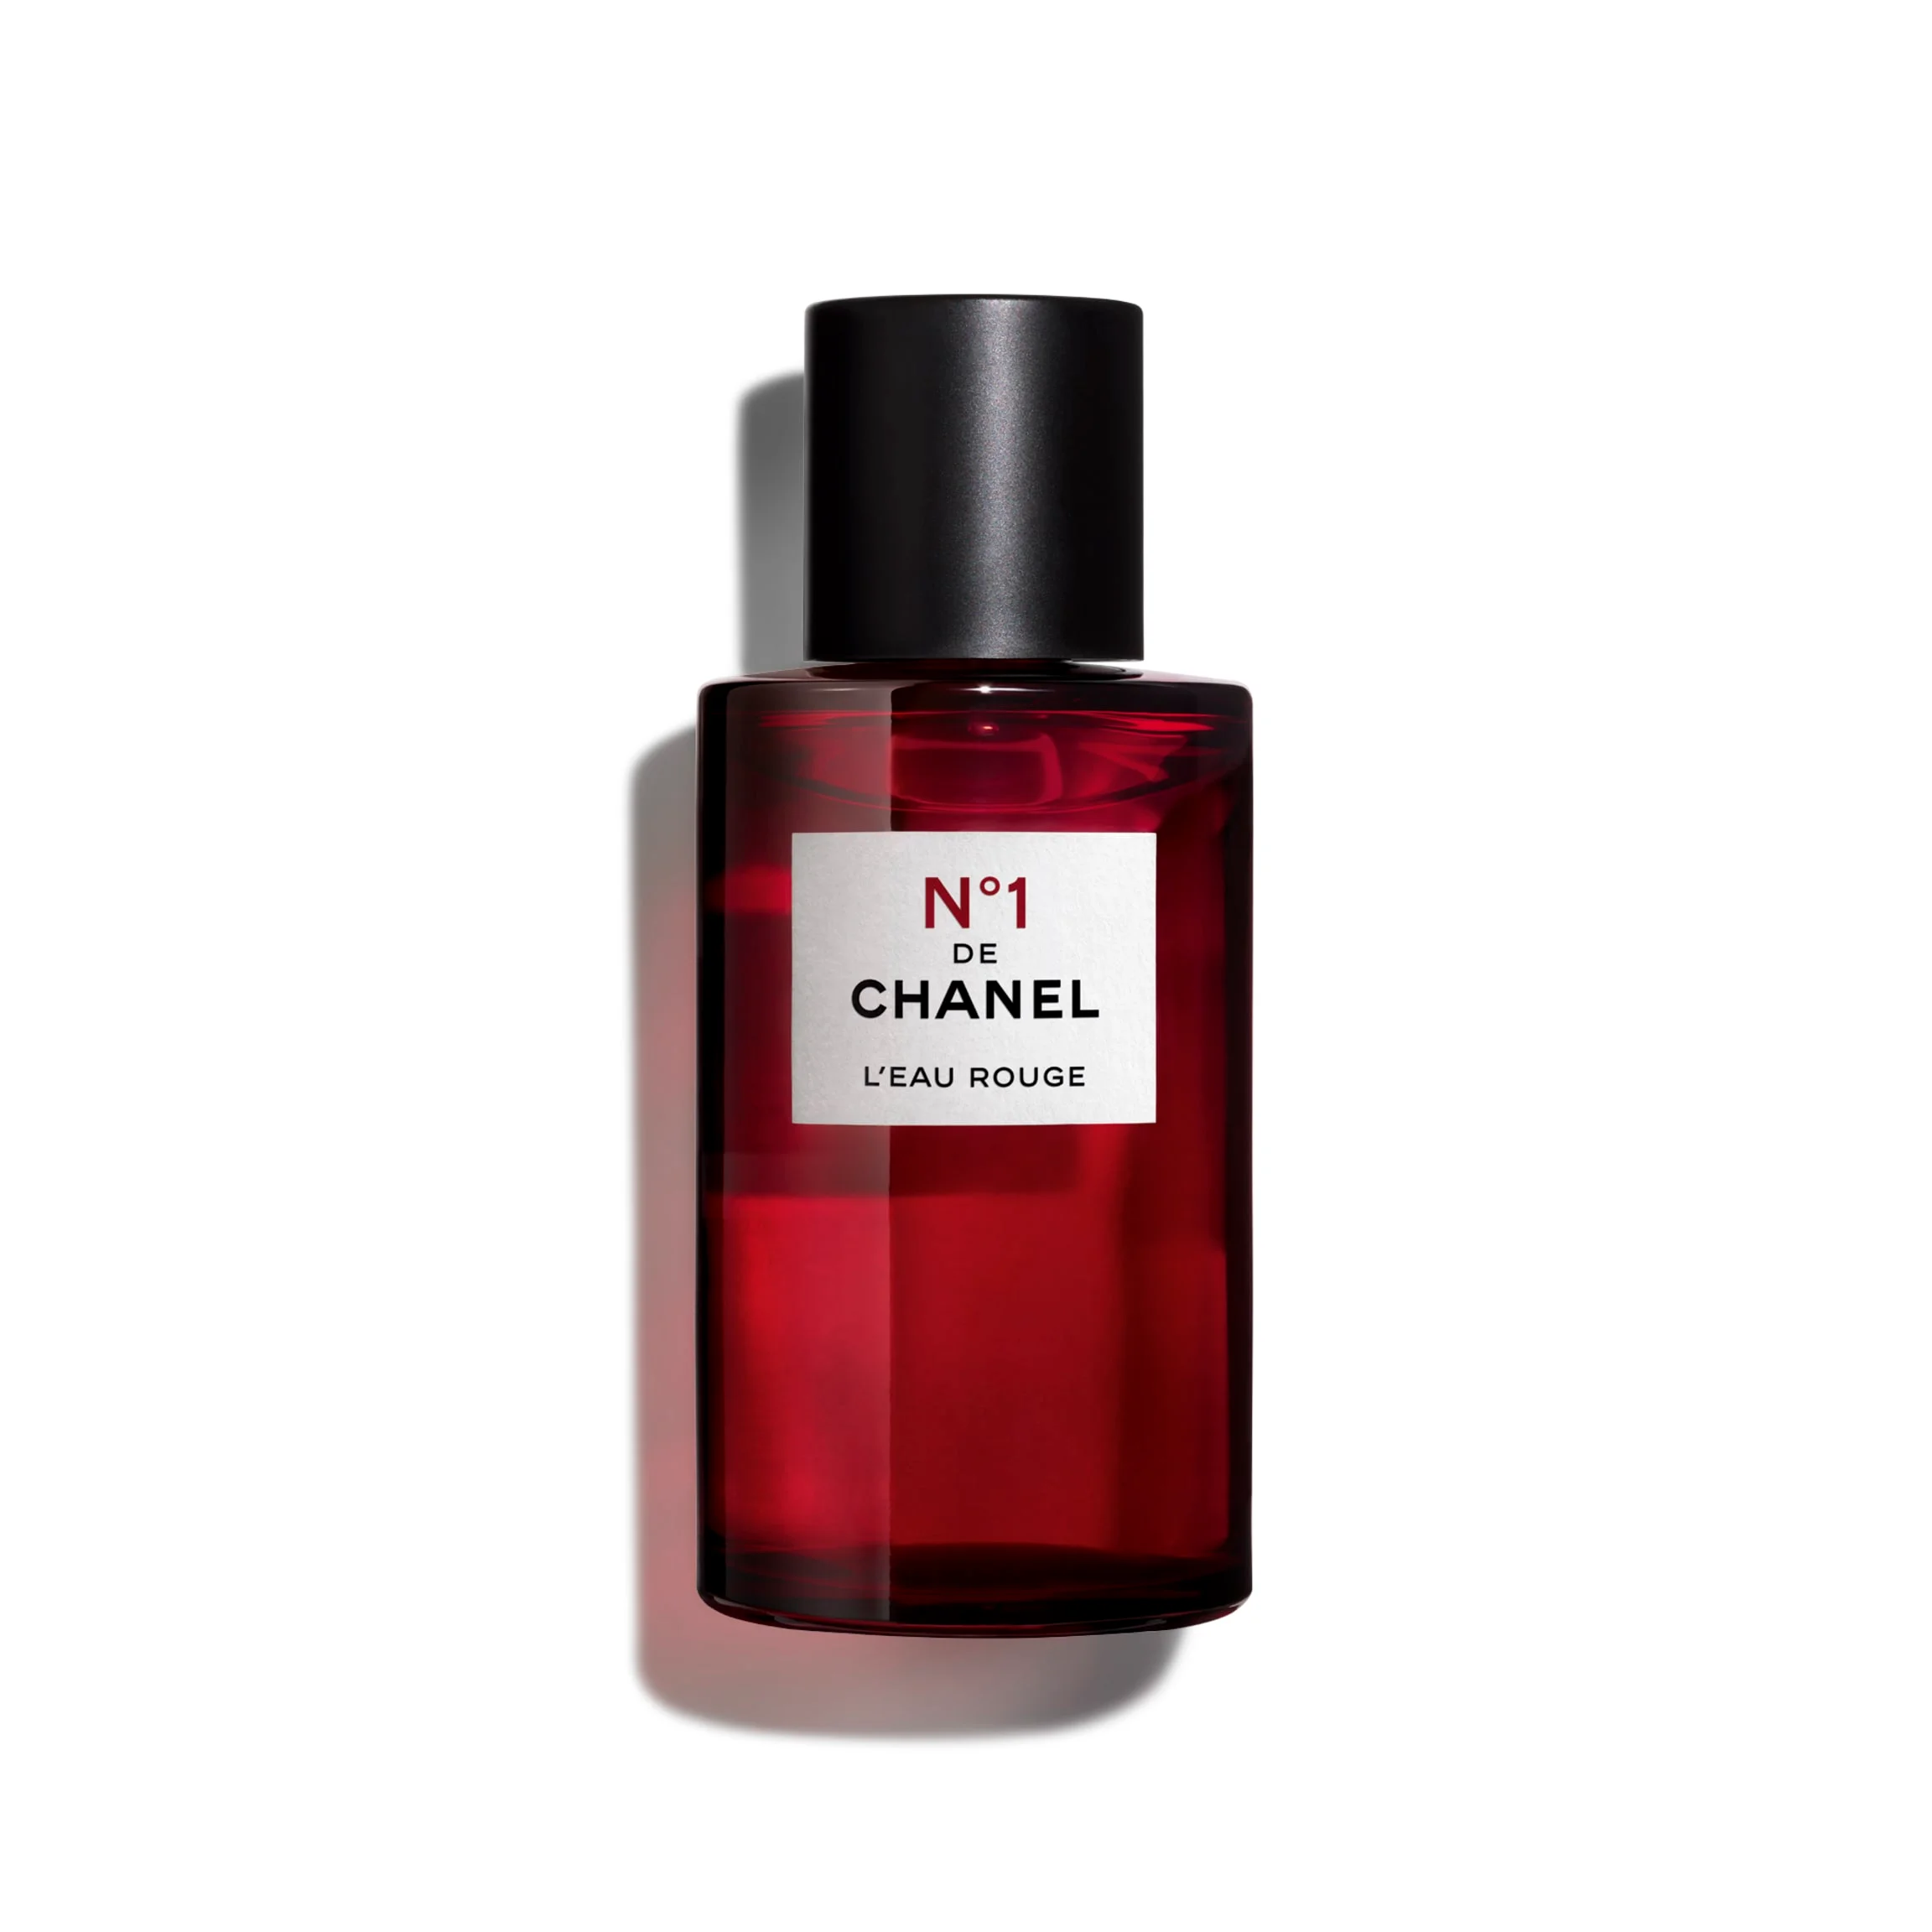 Chanel's full Rouge Noir collection